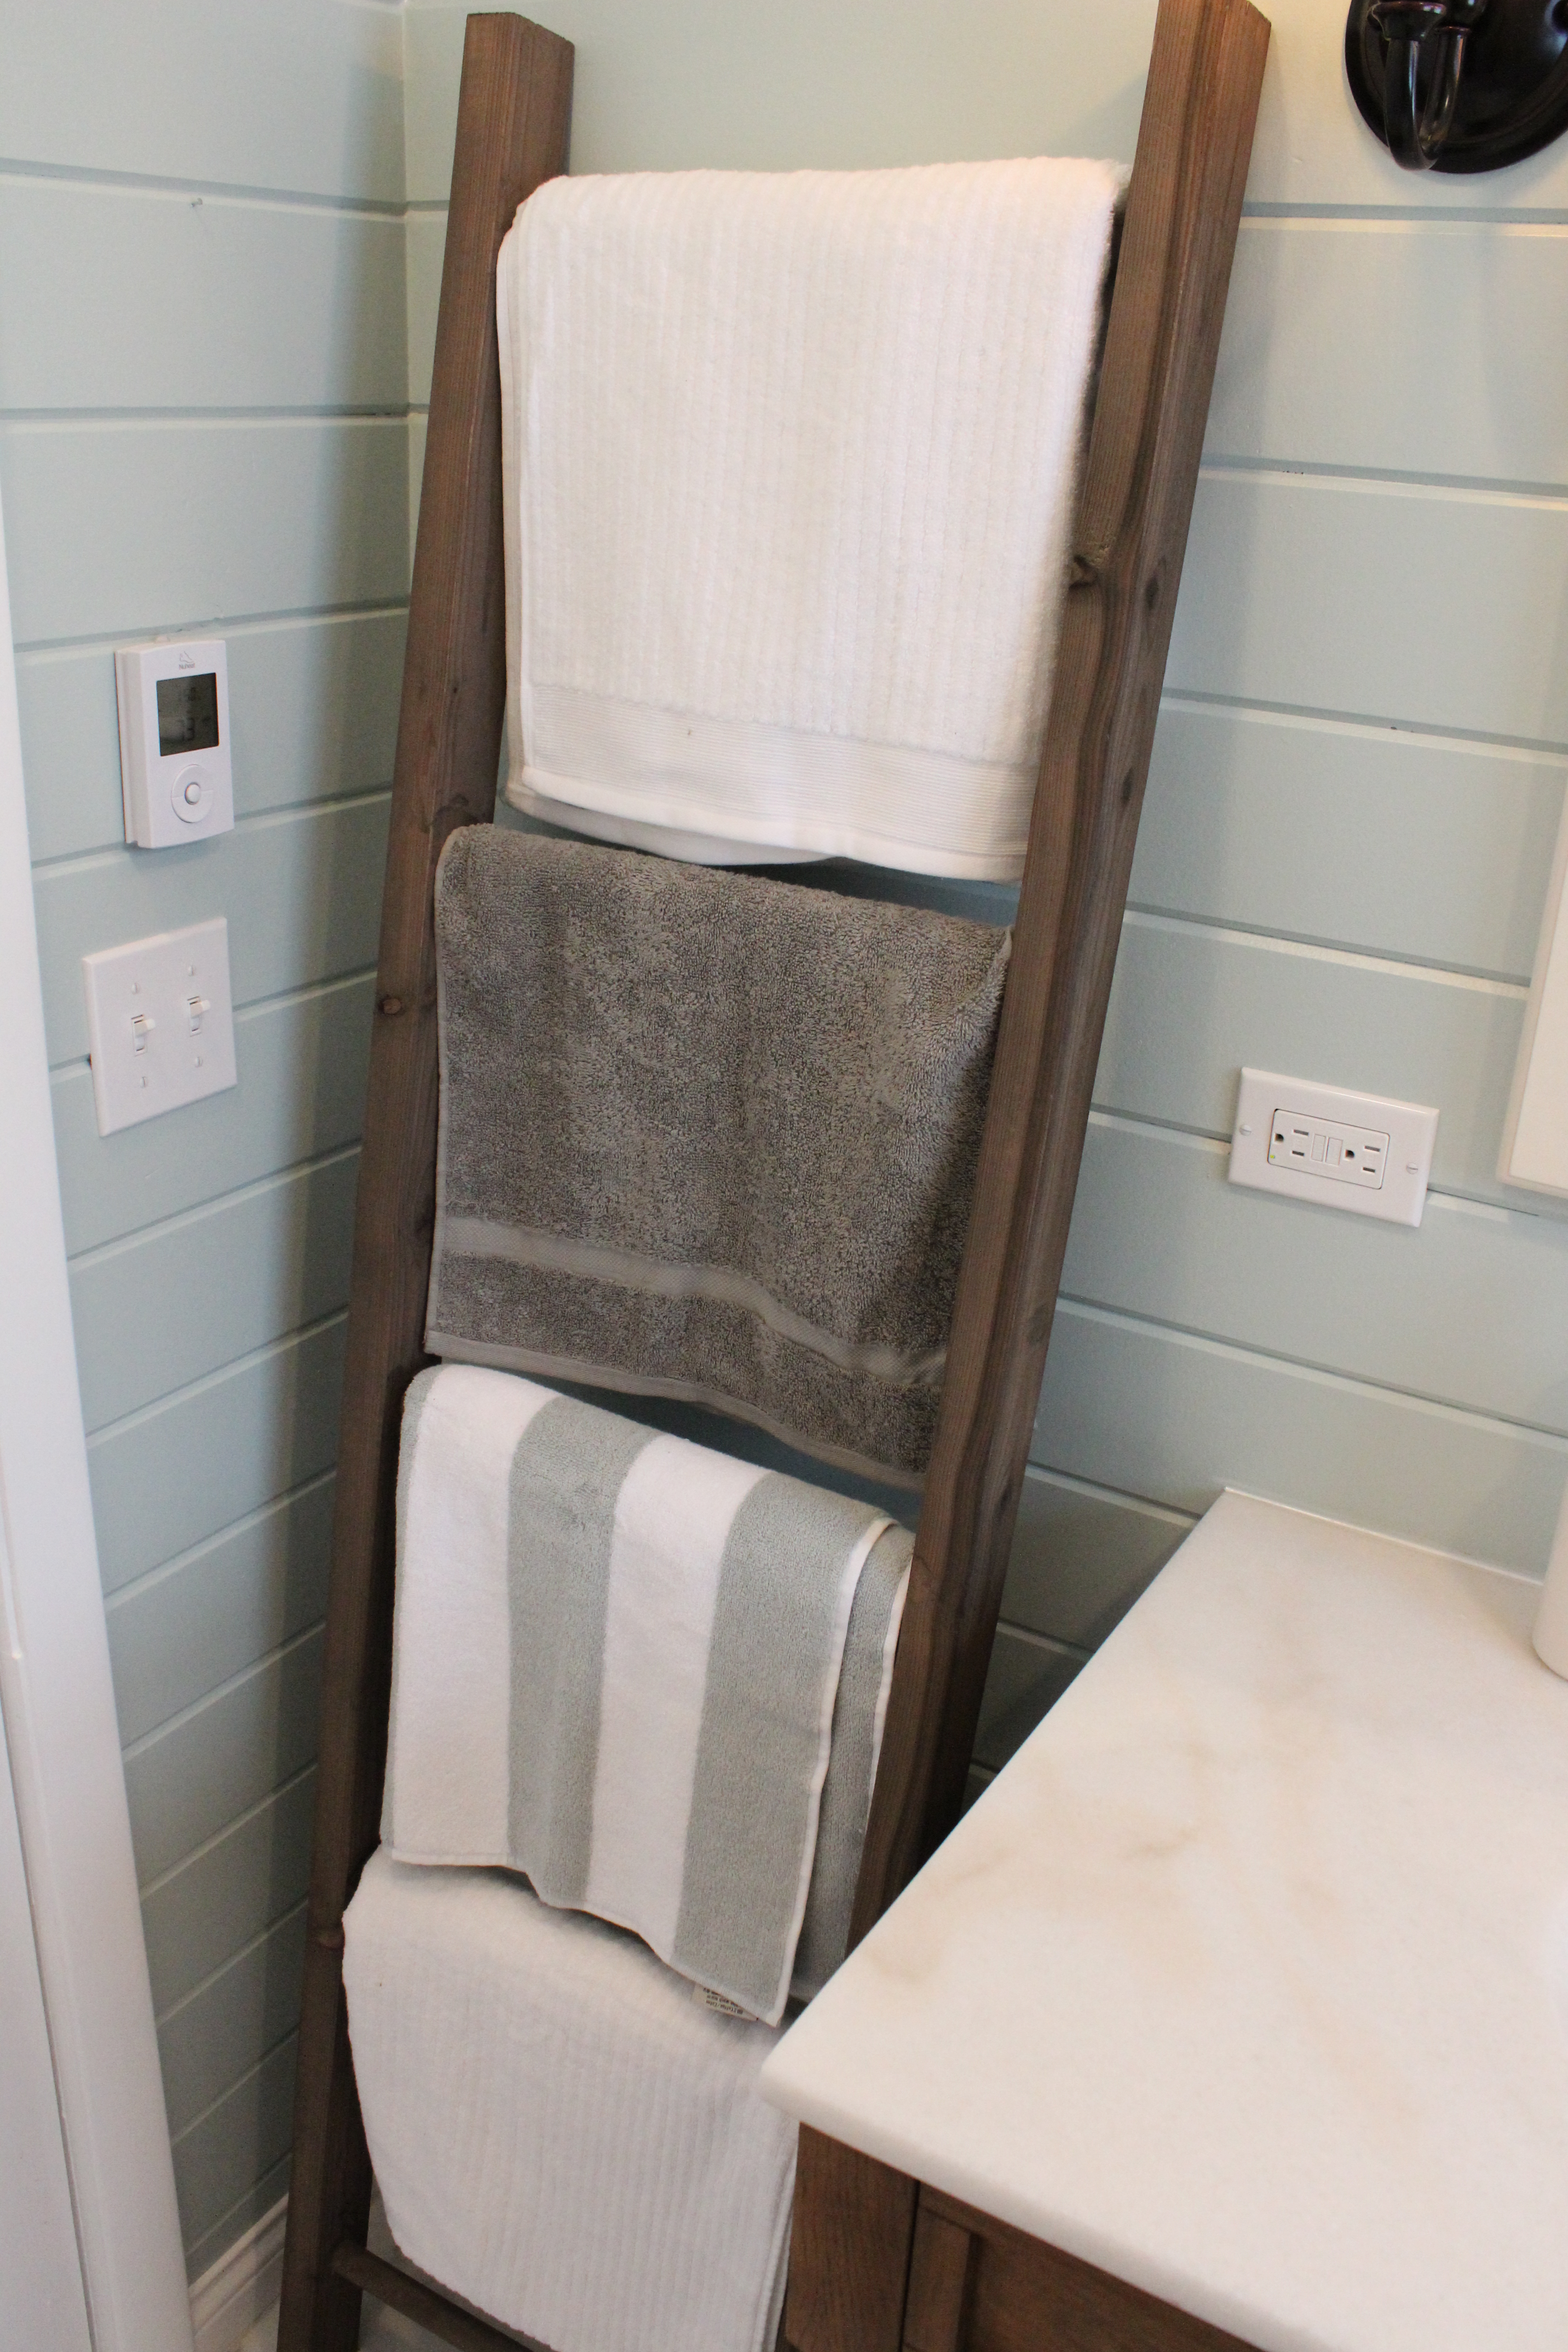 How to Build a Rustic, Weathered Ladder for Towels or Blankets